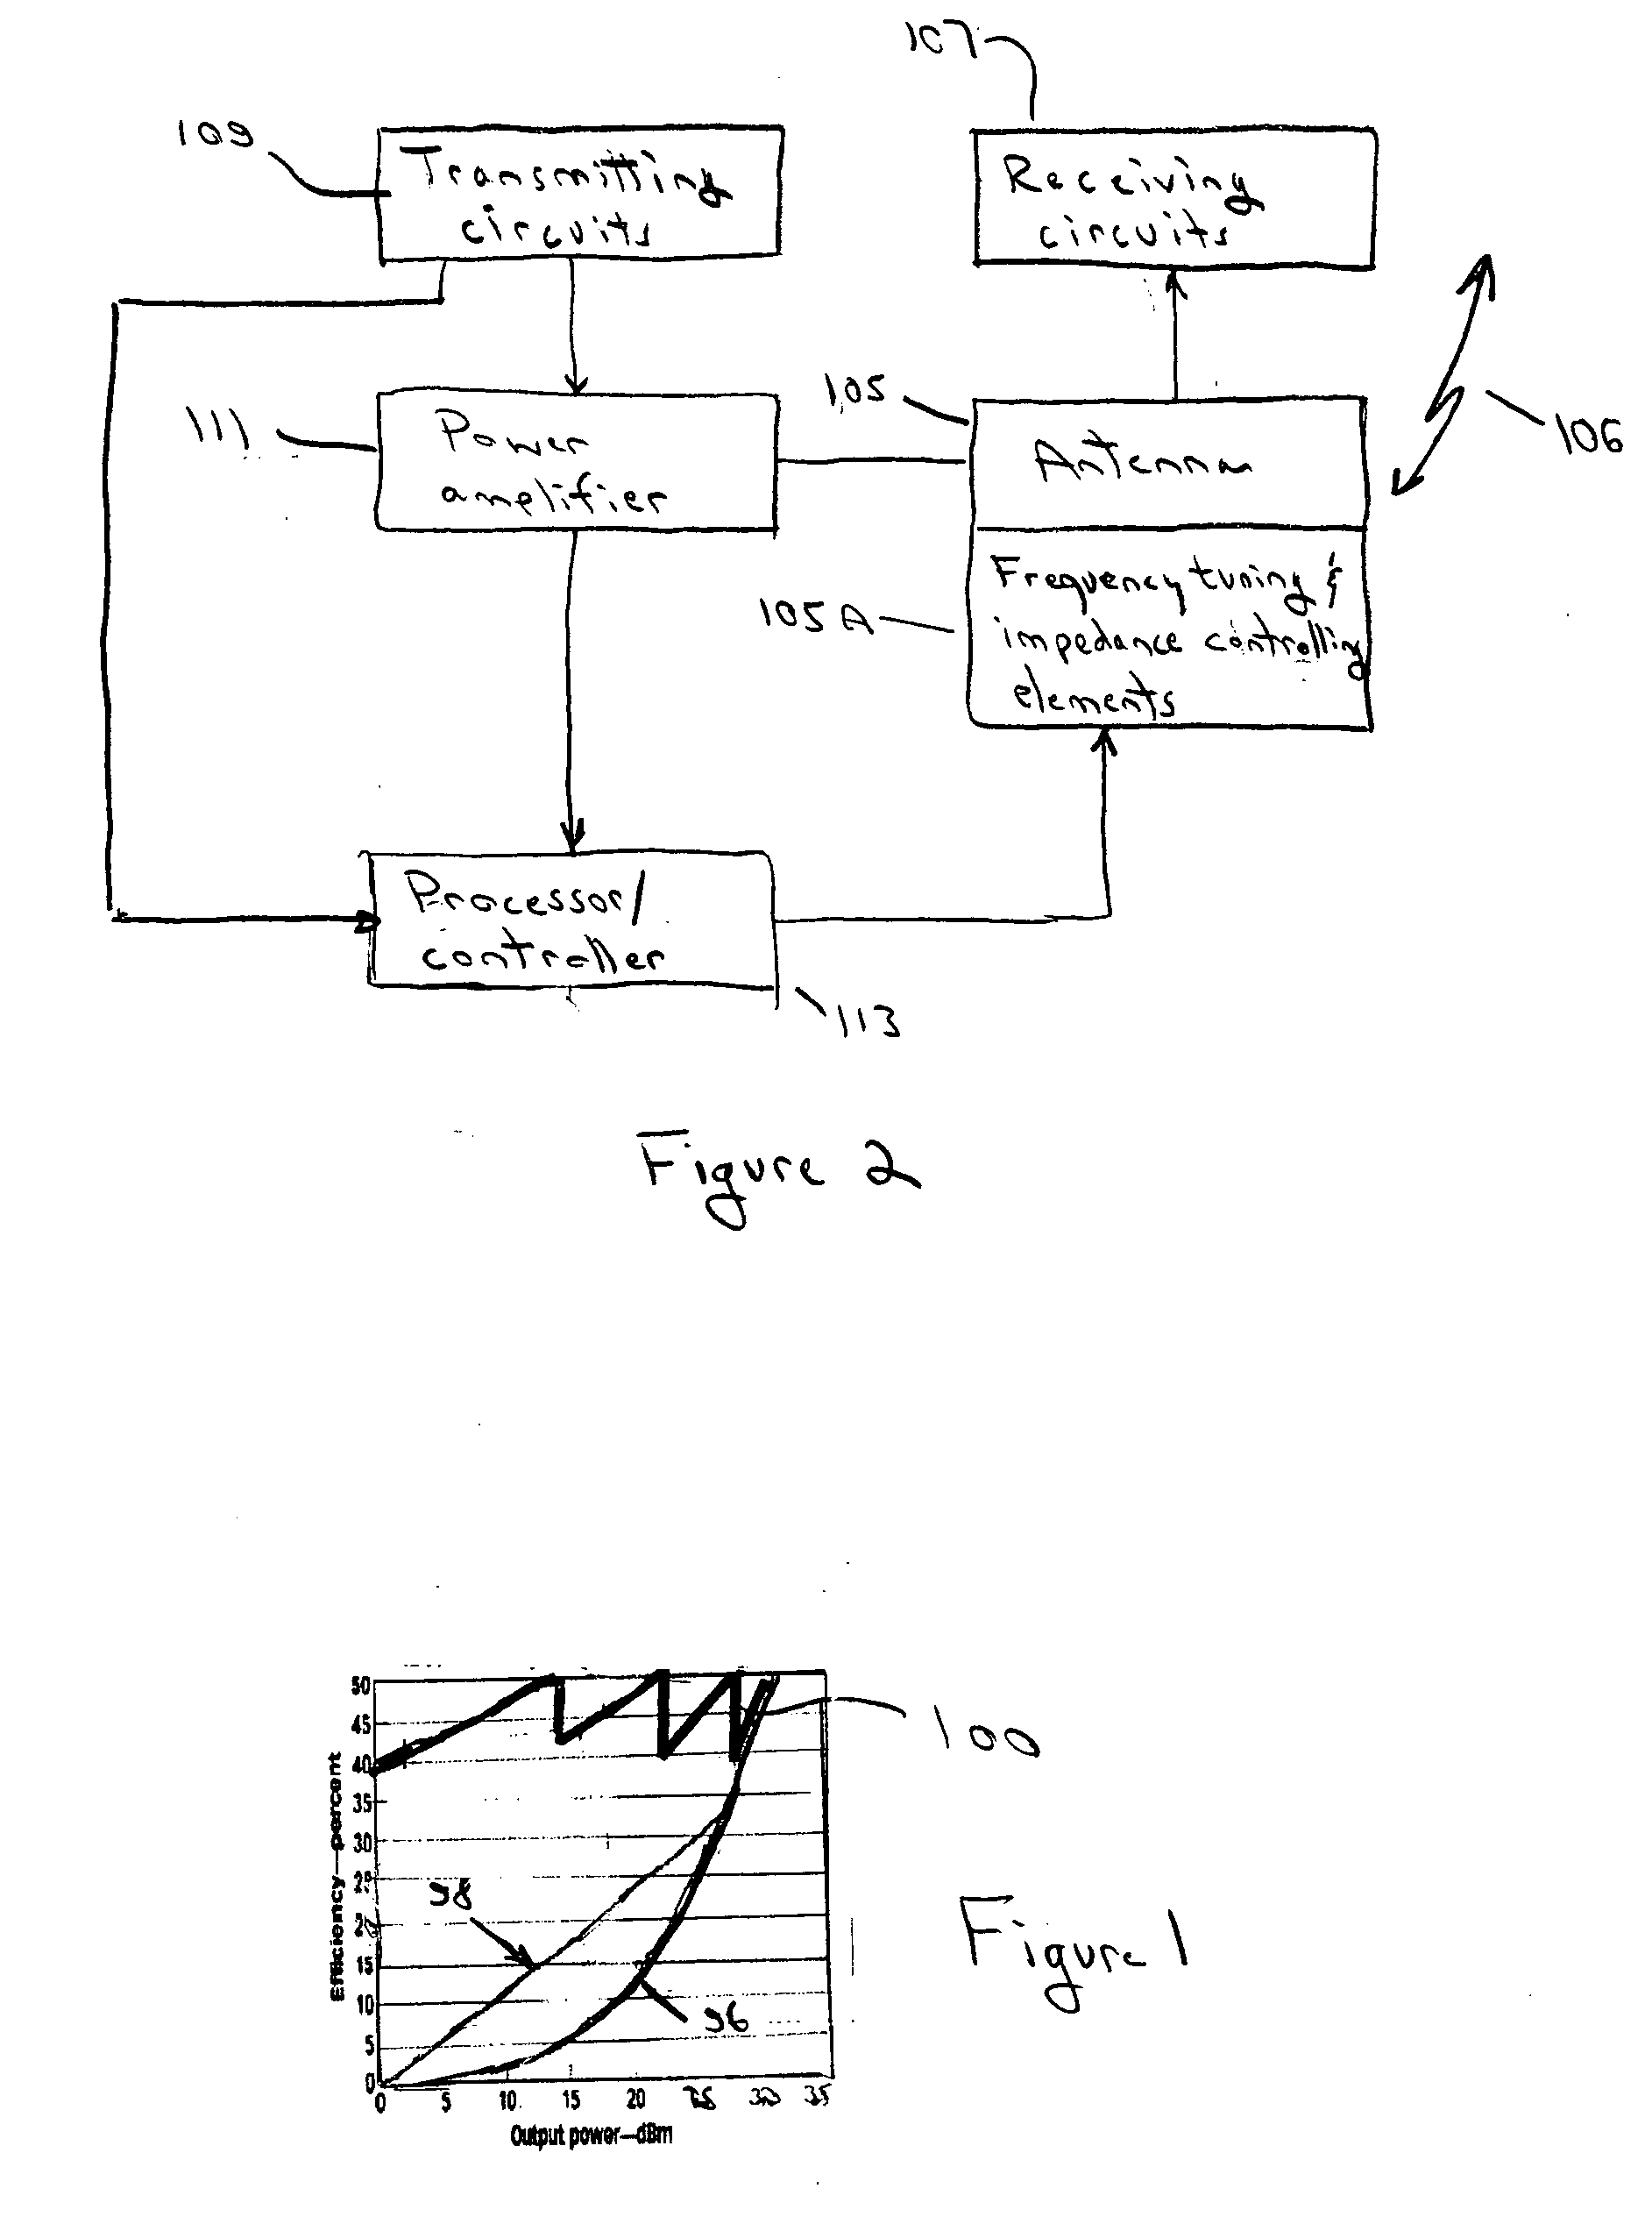 Method and apparatus for adaptively controlling antenna parameters to enhance efficiency and maintain antenna size compactness